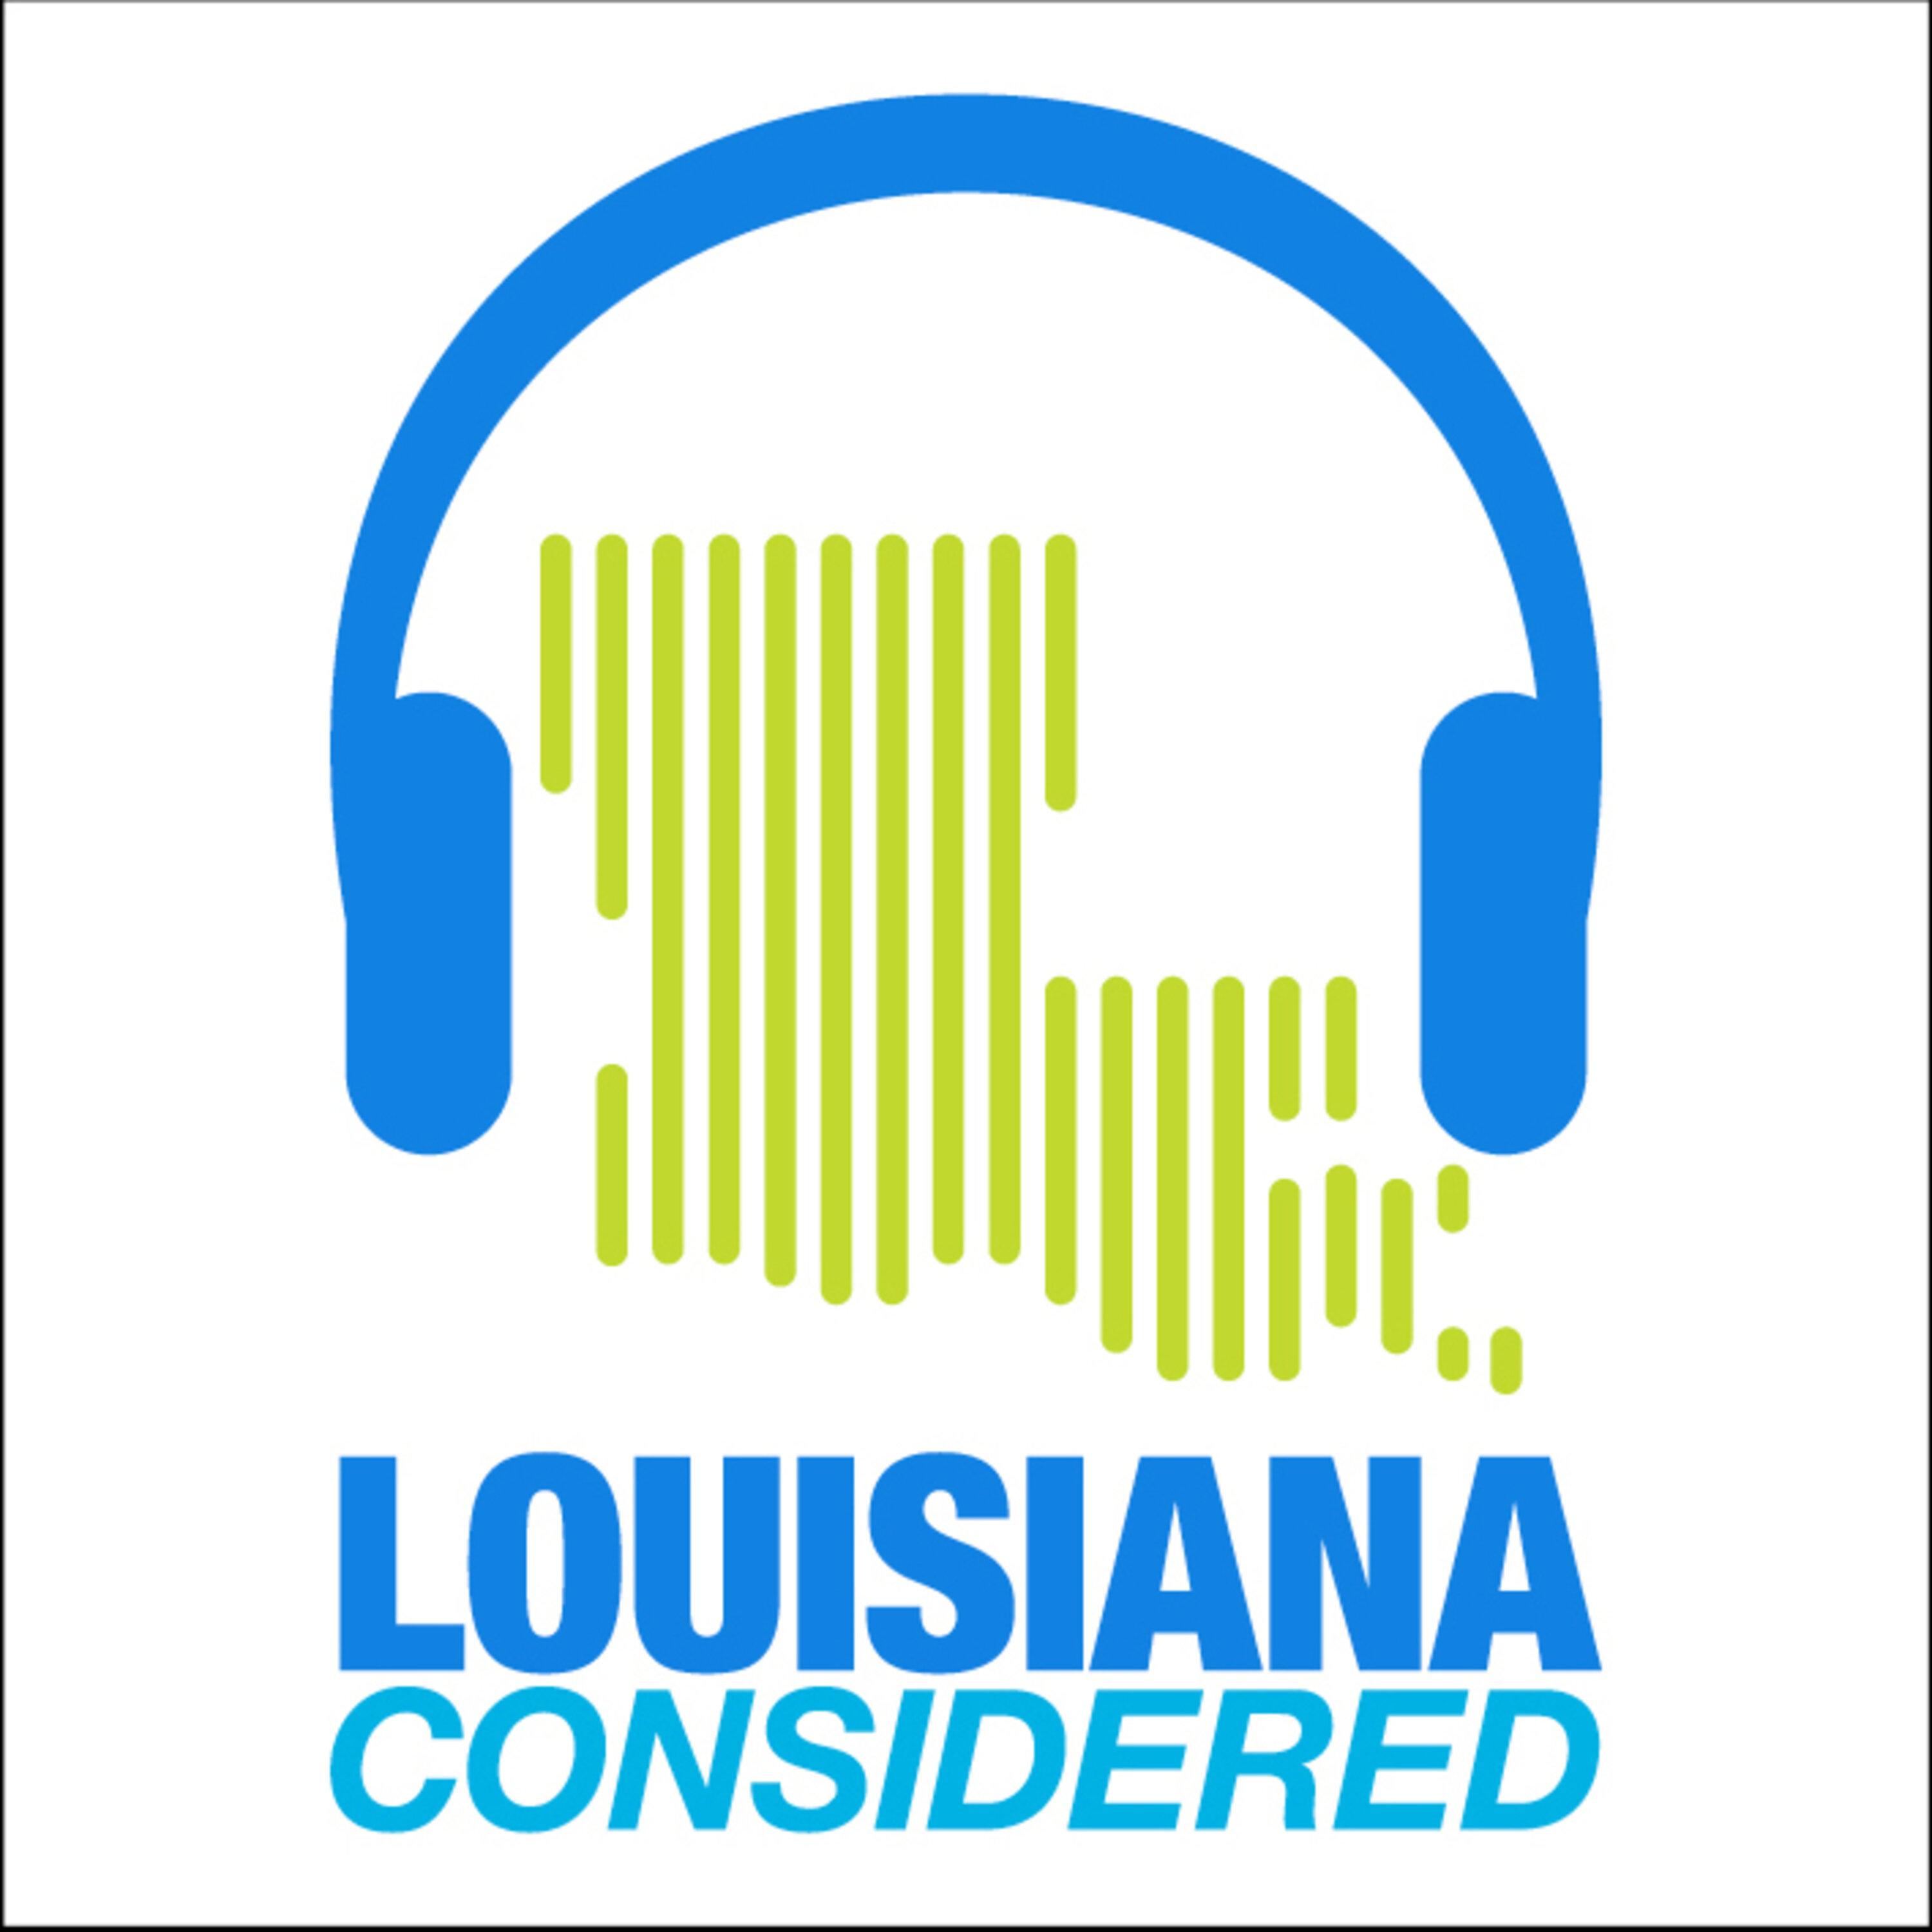 Thumbnail for "Louisiana Considered: Journalist Eve Abrams On Louisiana's Criminal Justice Reform Efforts".